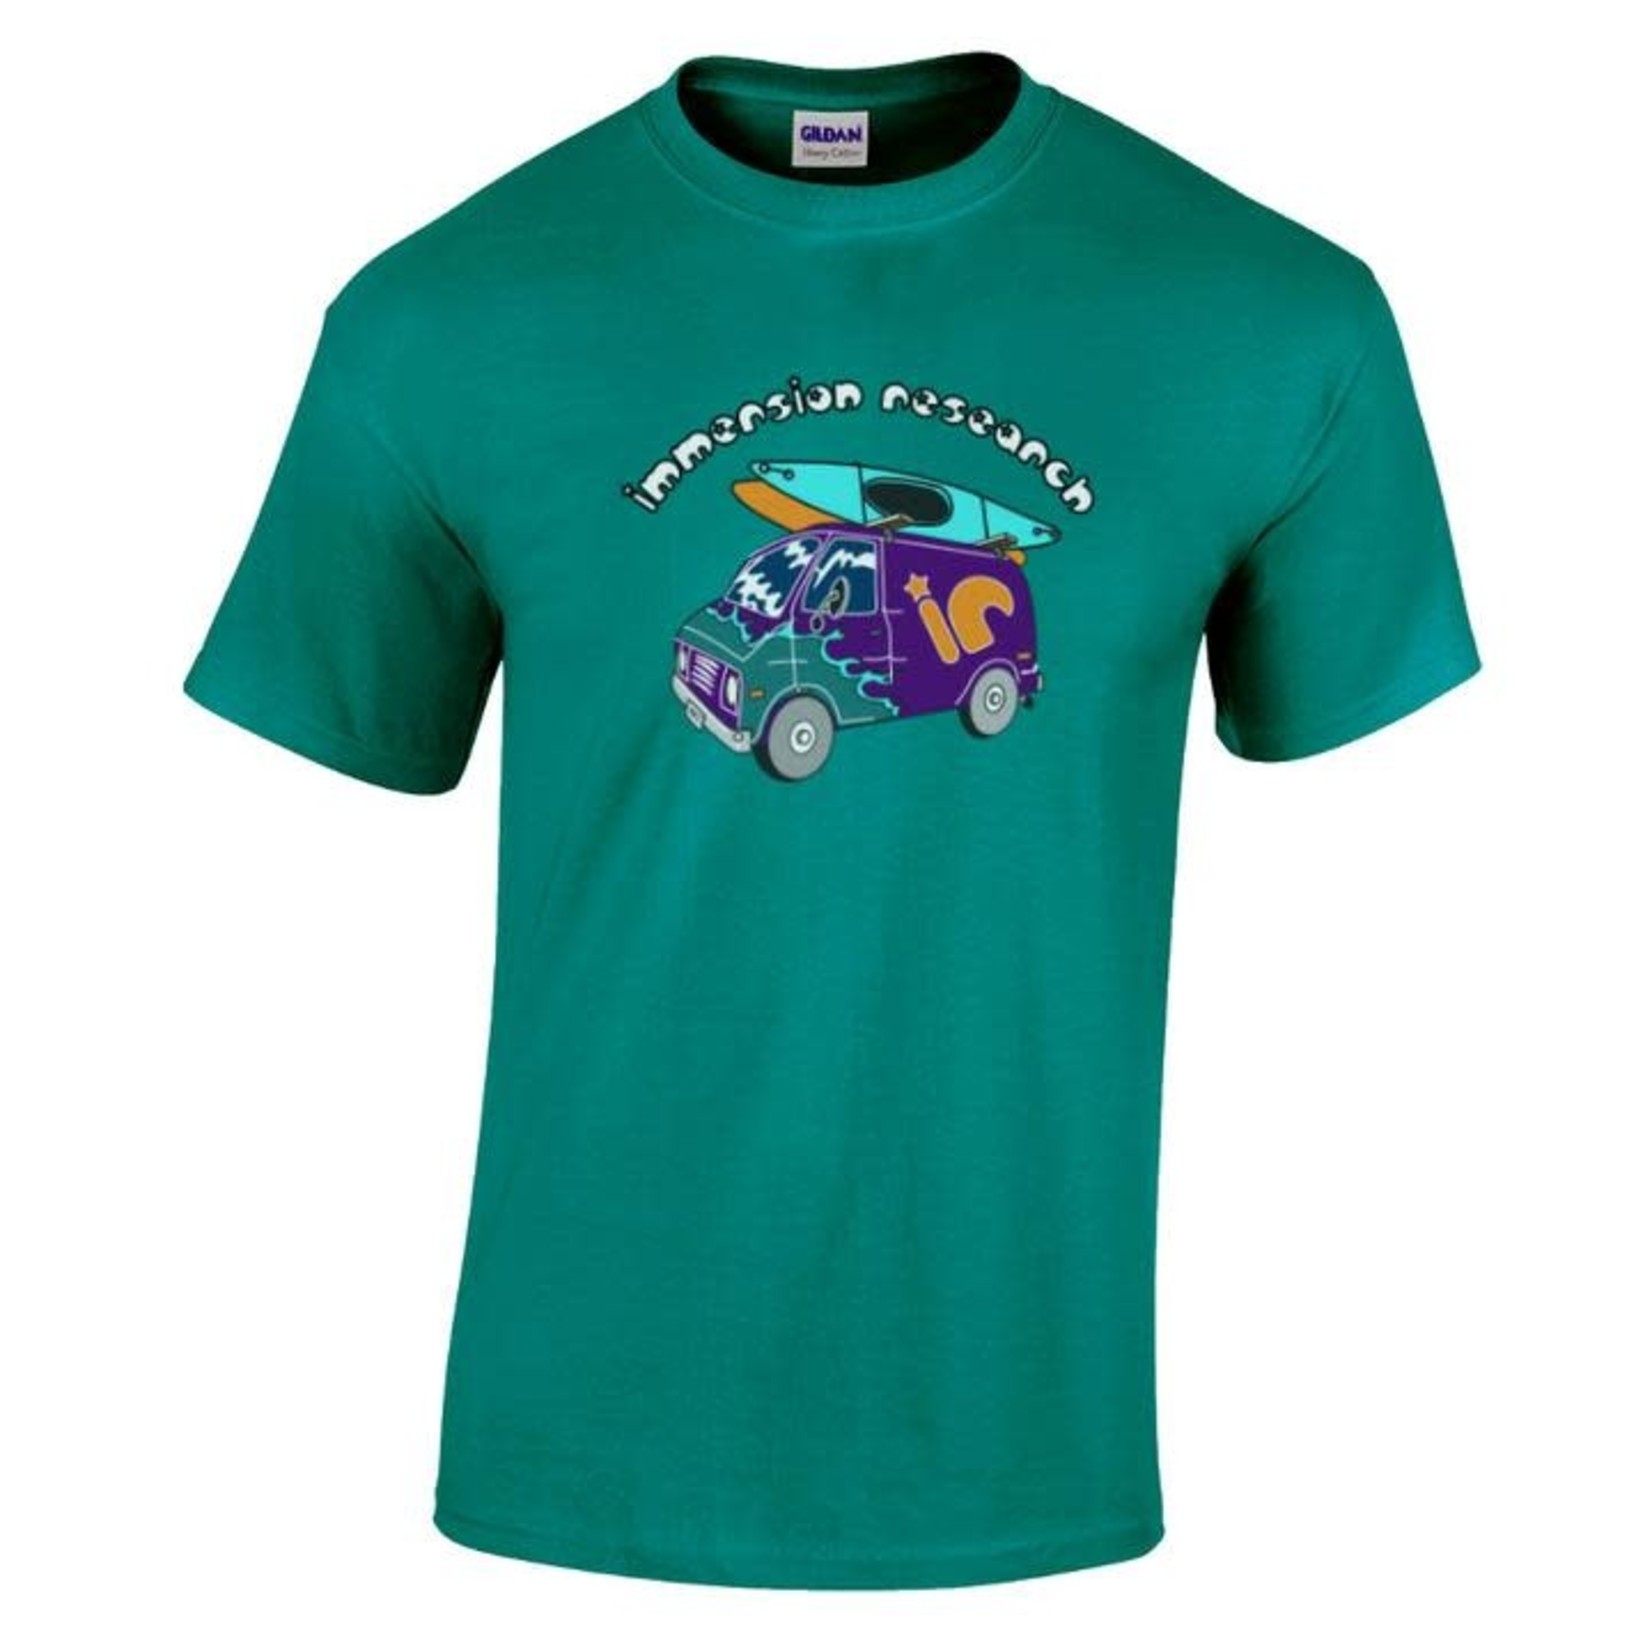 Immersion Research Immersion Research Sweet Van Tee Shirt  - Closeout